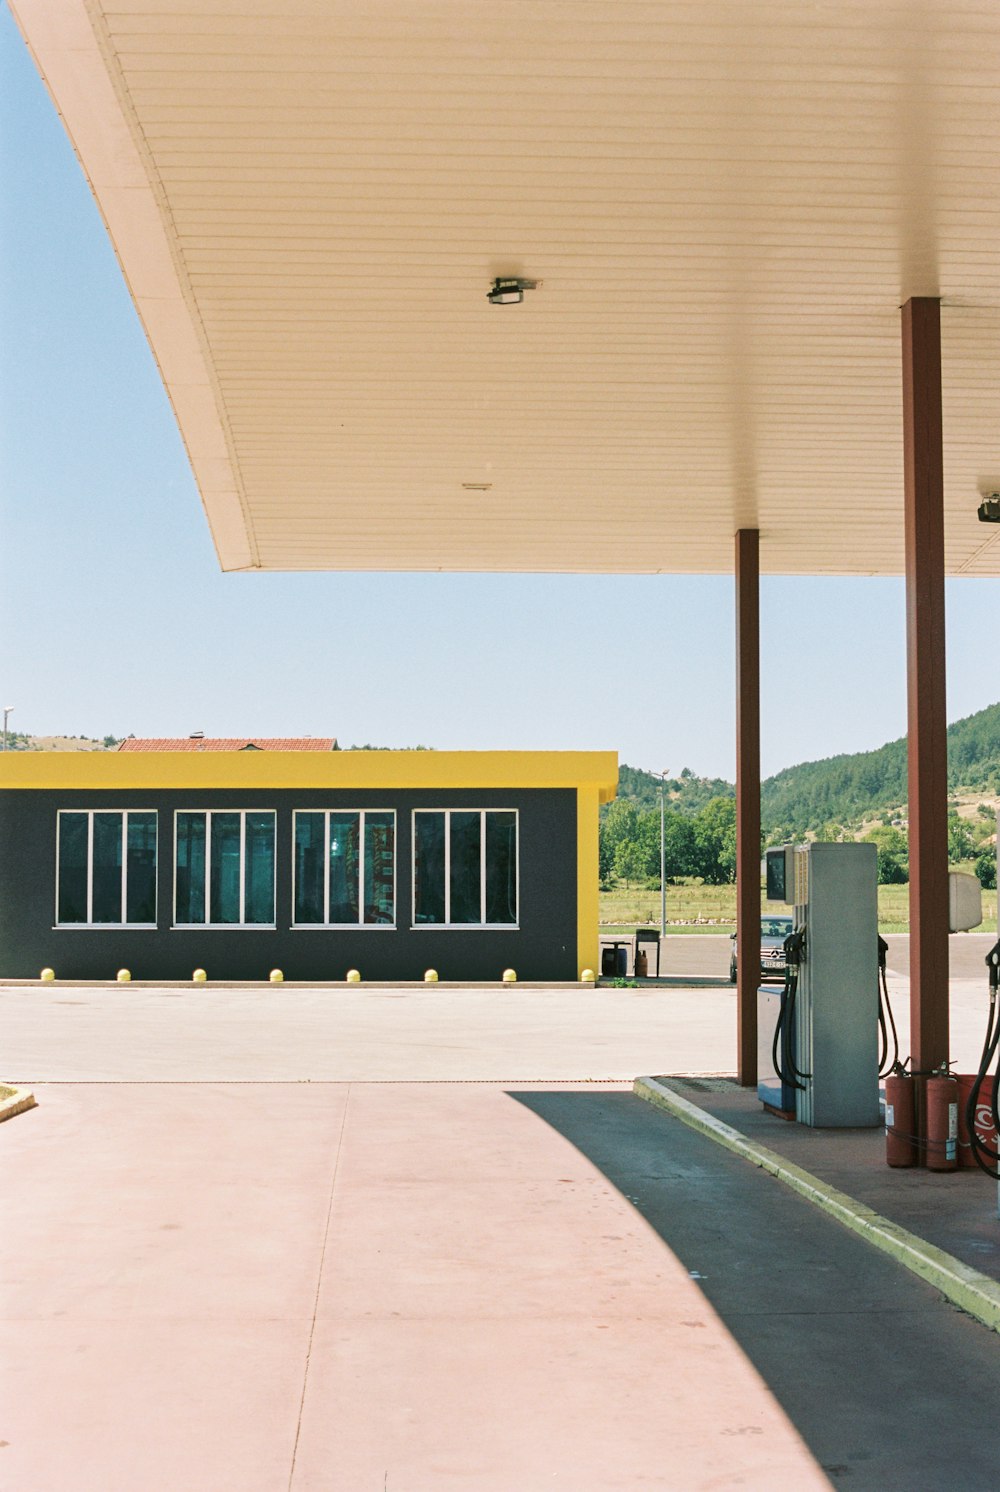 a gas station with a yellow and black building